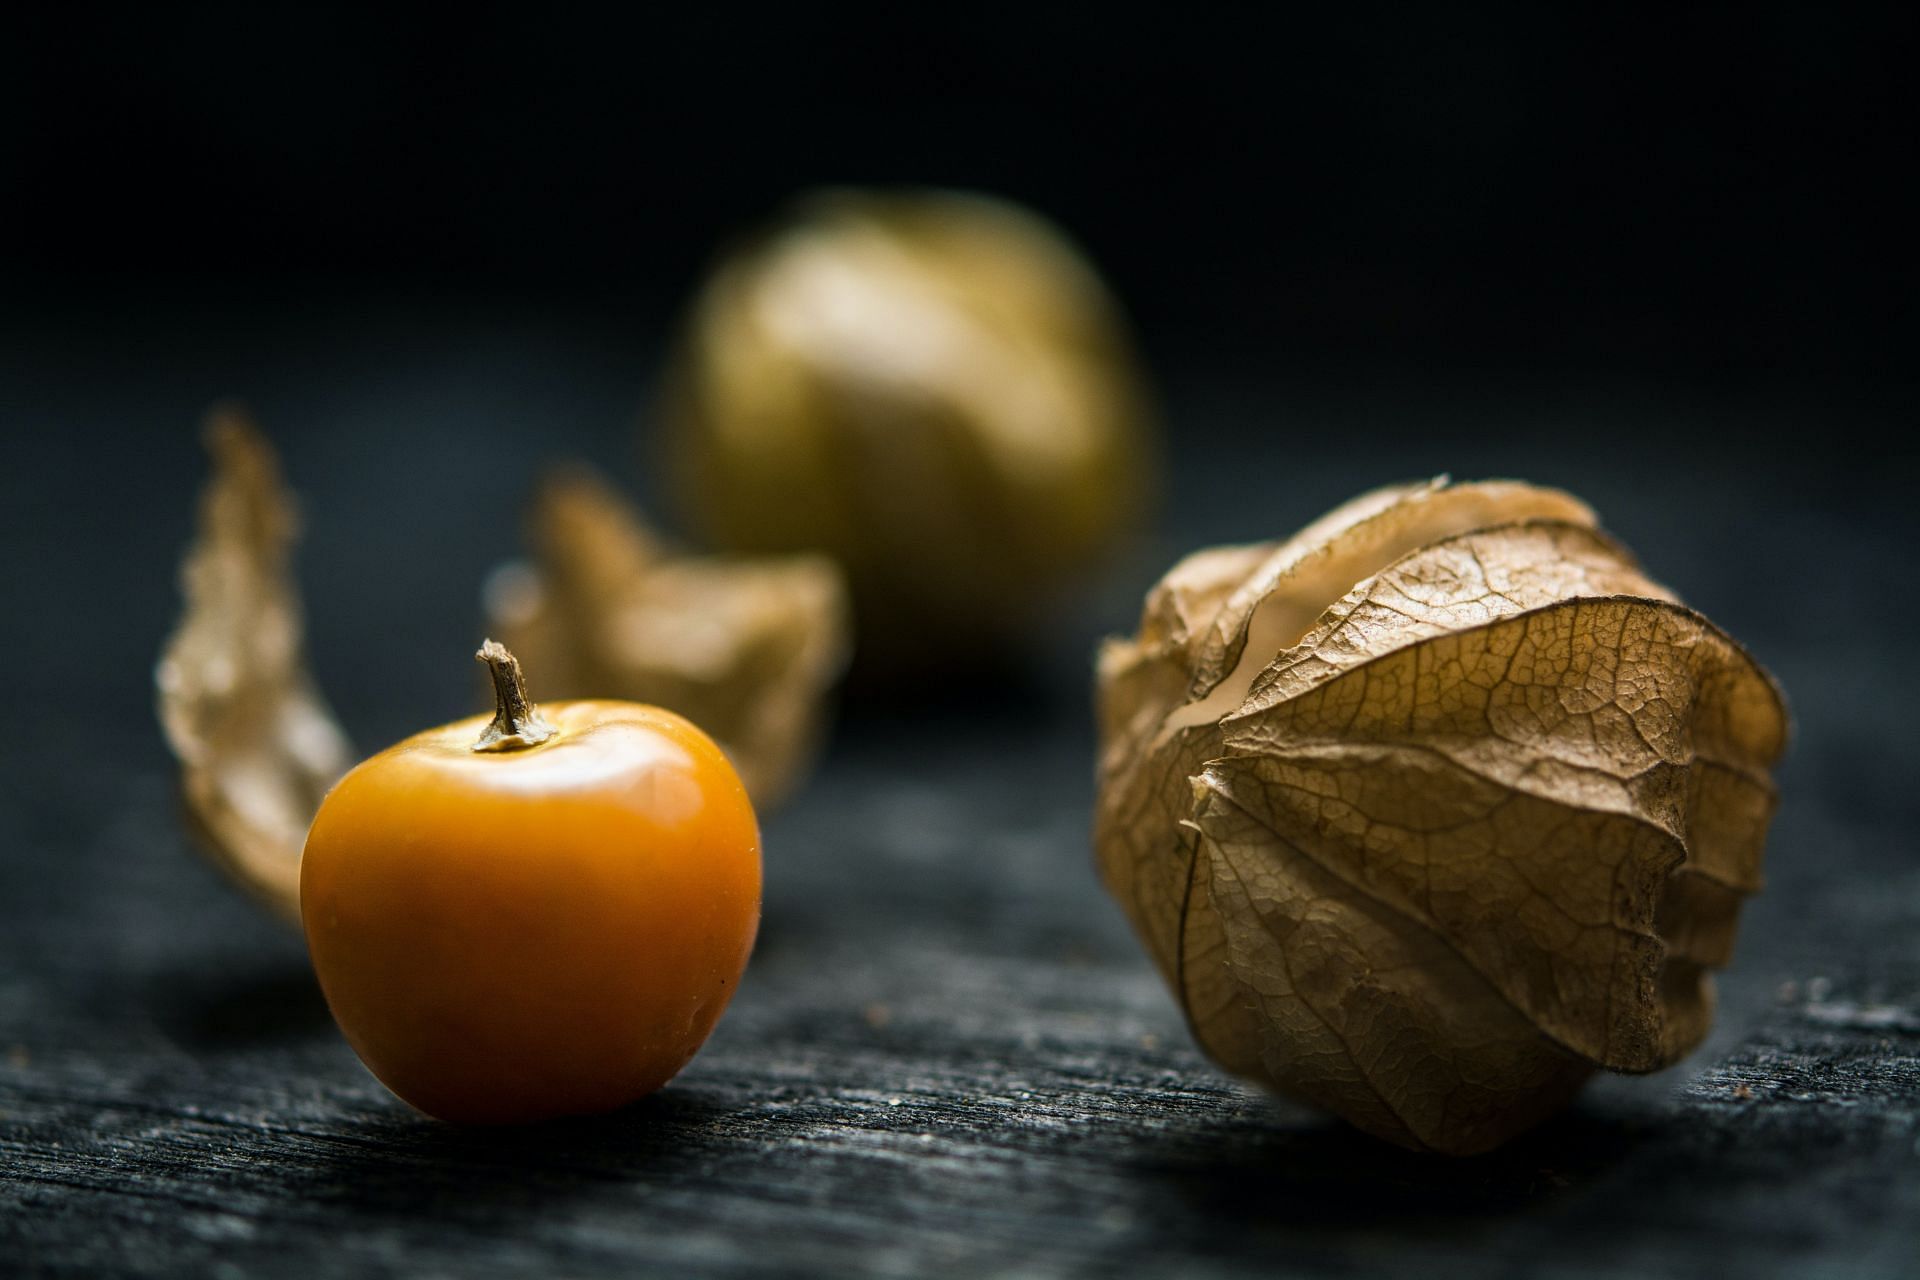 Discover the many benefits of Physalis for your health and well-being. ()Image via Pexels